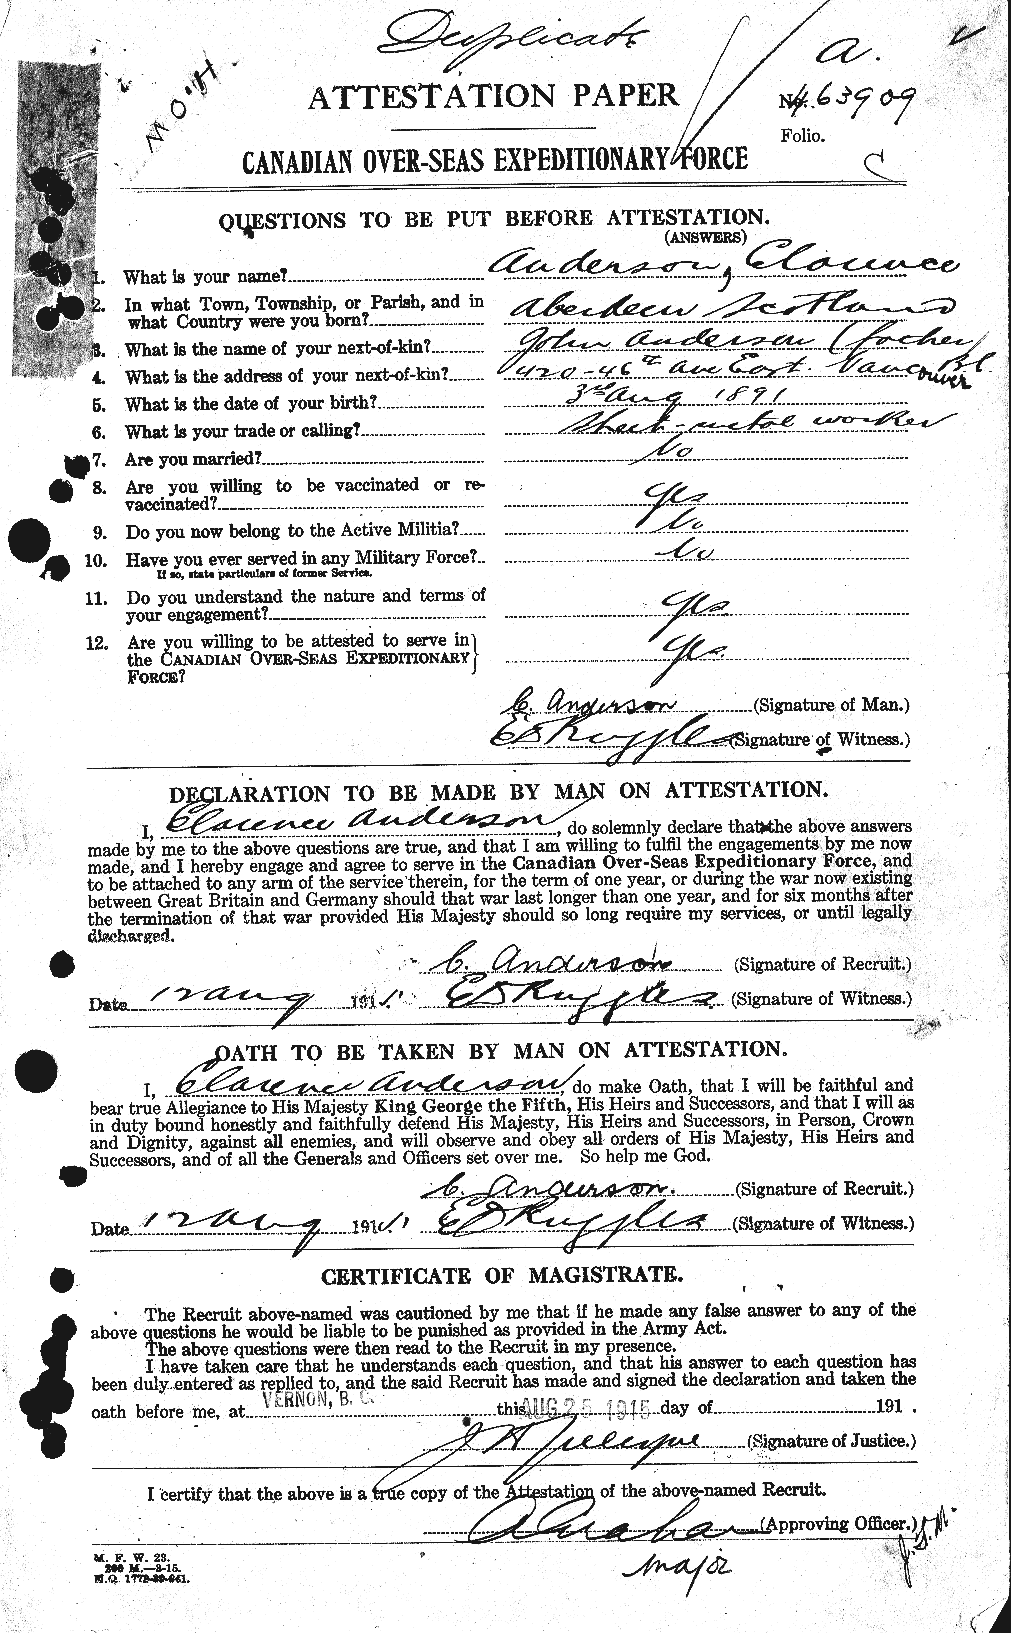 Personnel Records of the First World War - CEF 209202a